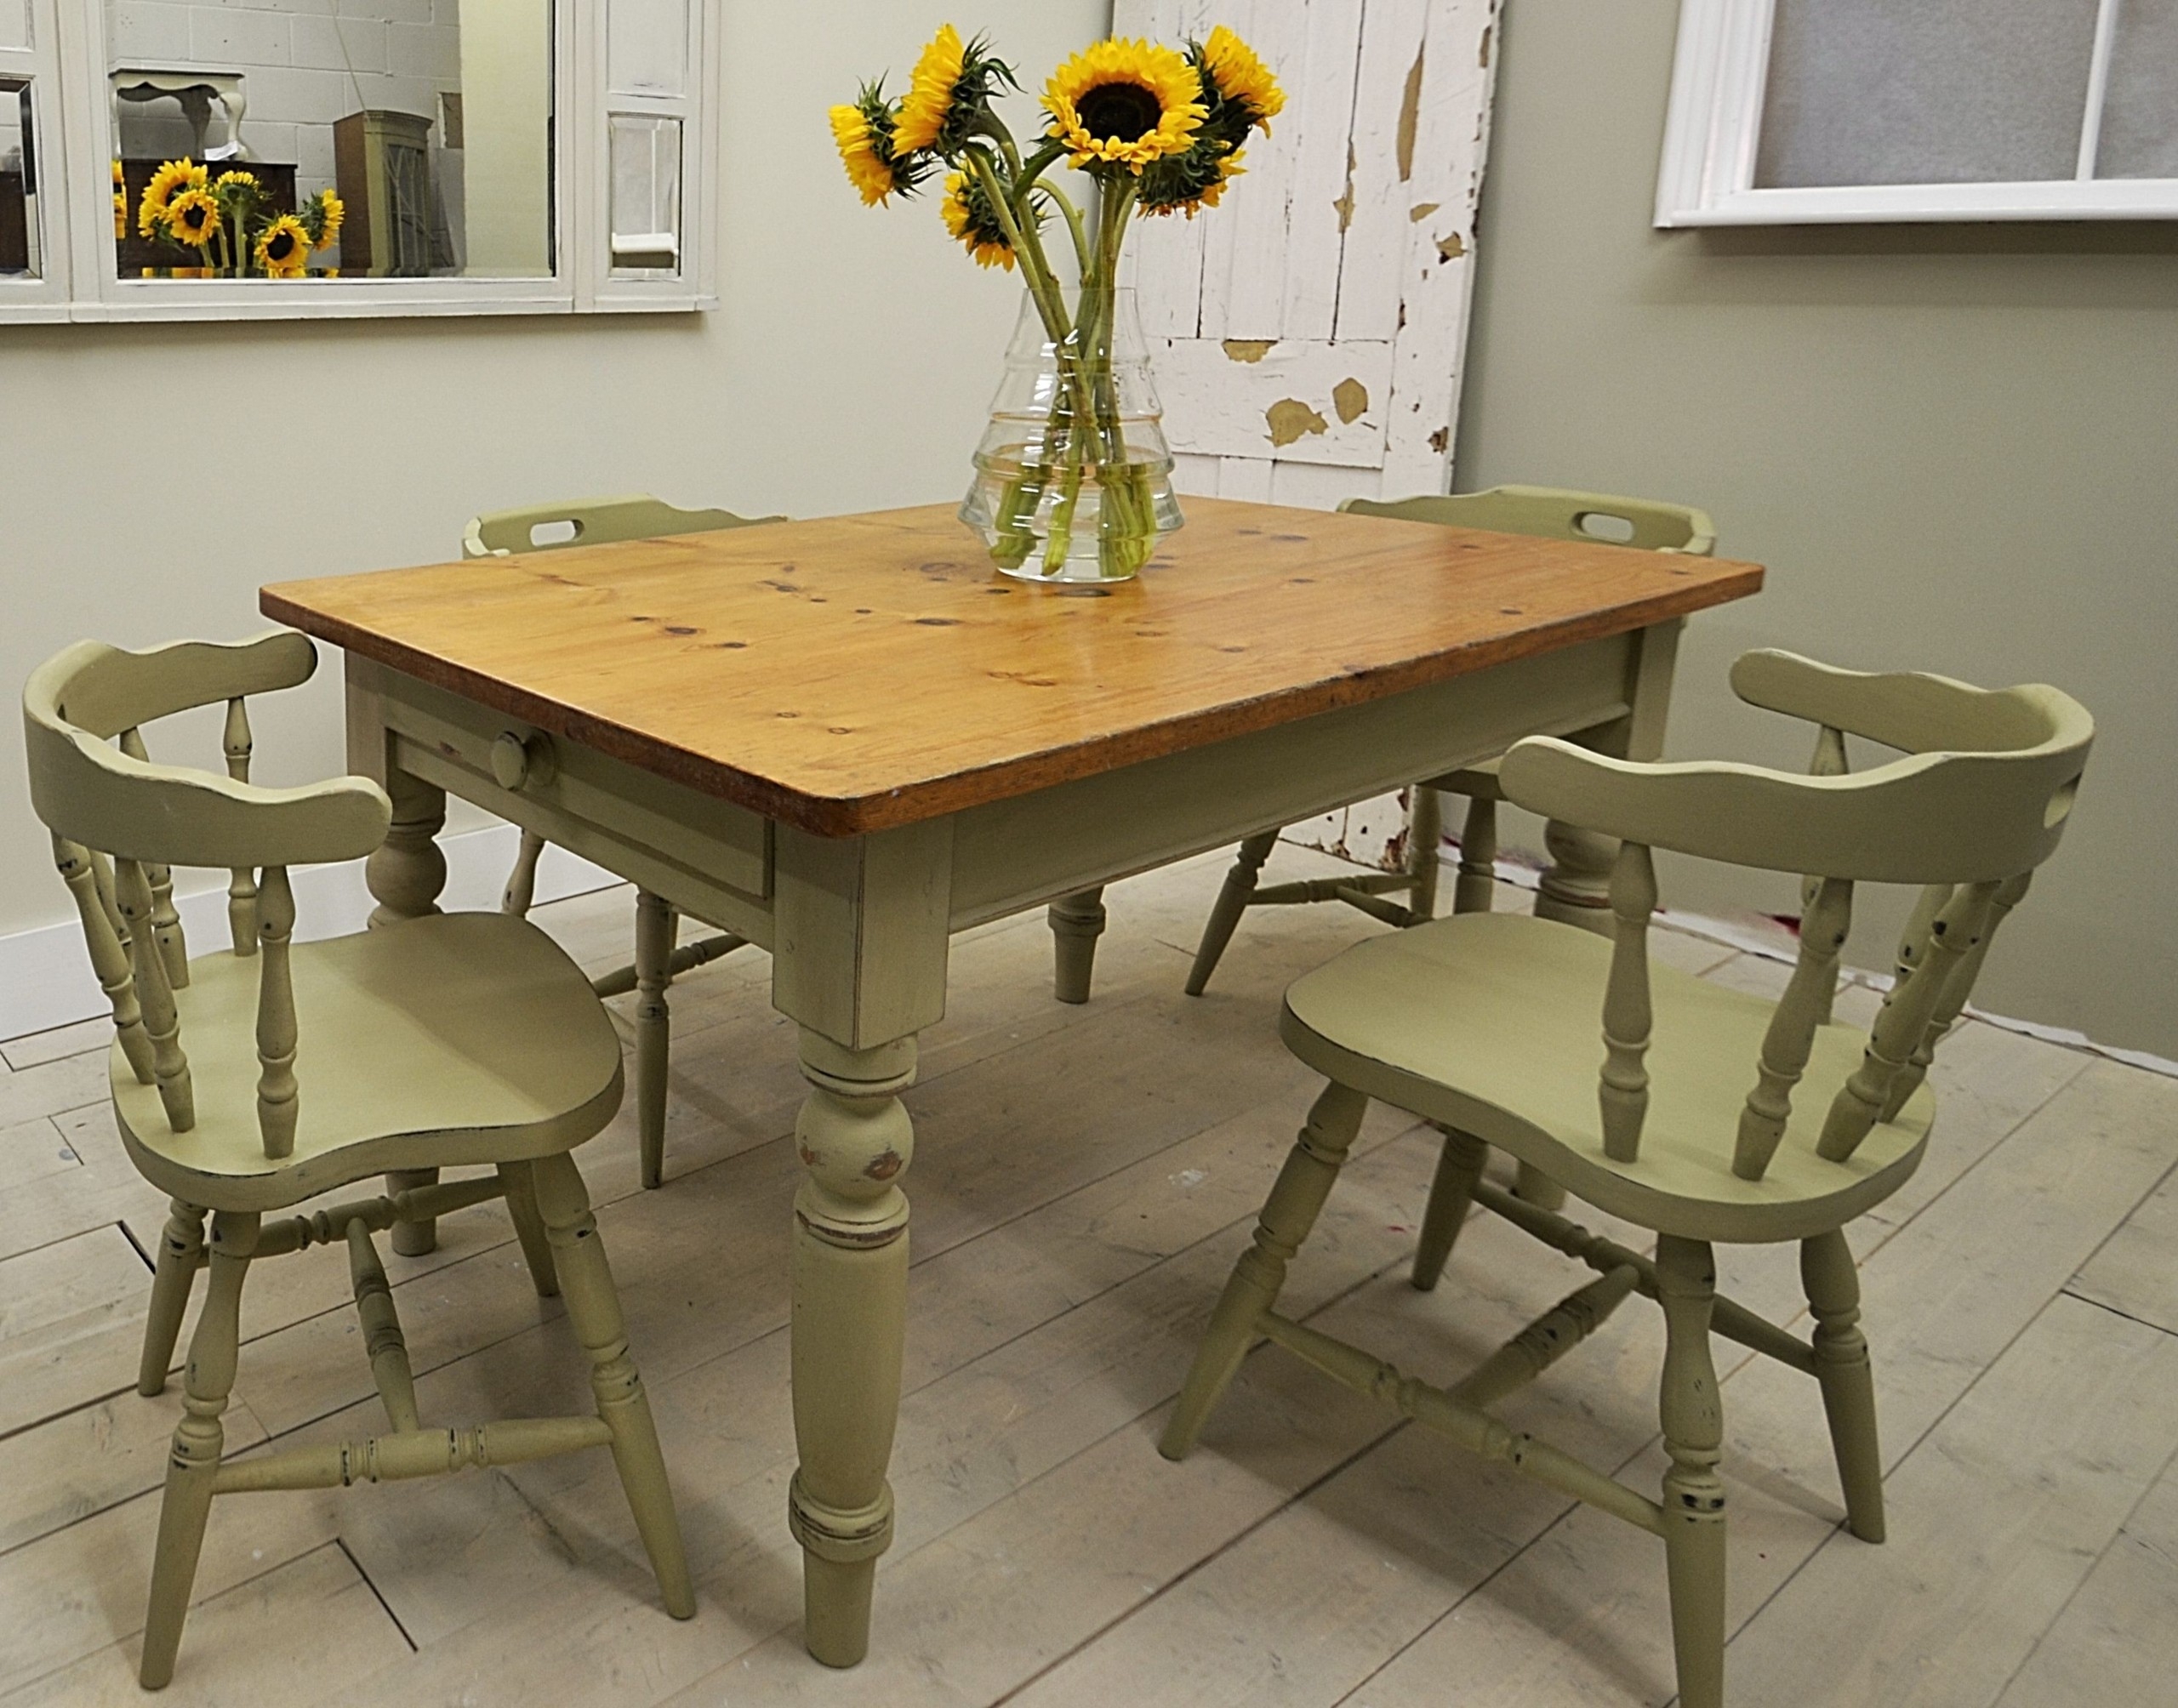 Dining Room Table With Captains Chairs